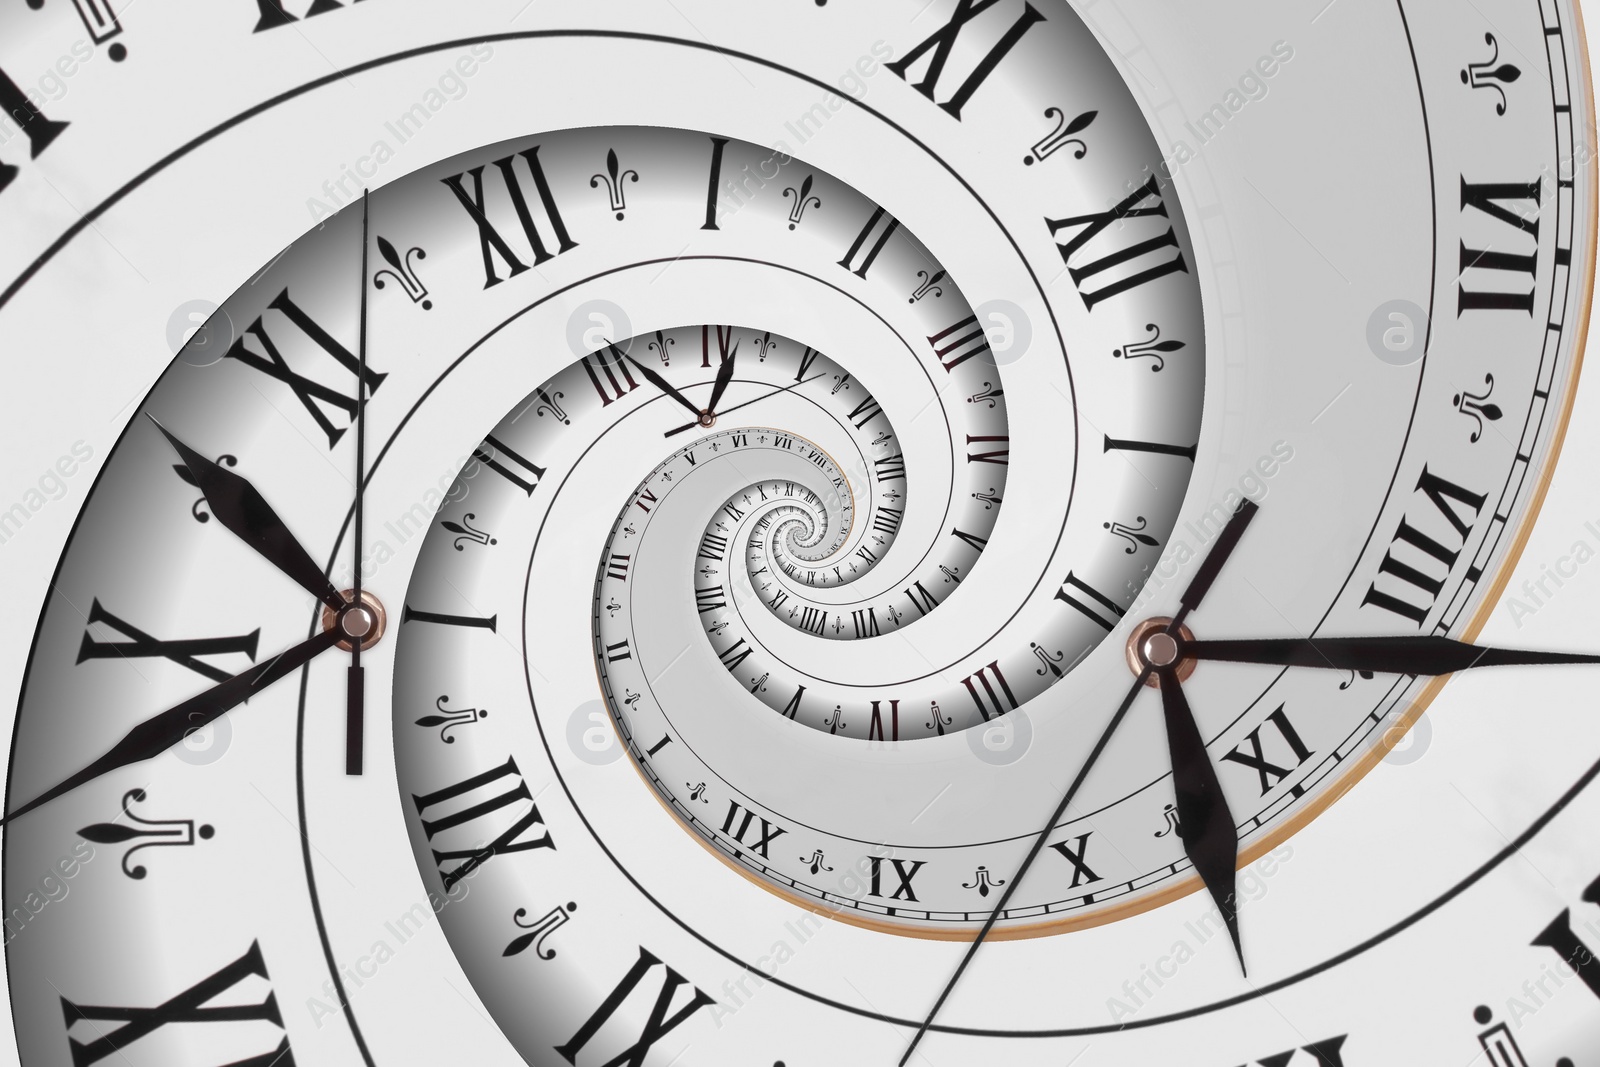 Image of Infinity and other time related concepts. White clock face with roman numerals twisted in spiral, fractal pattern